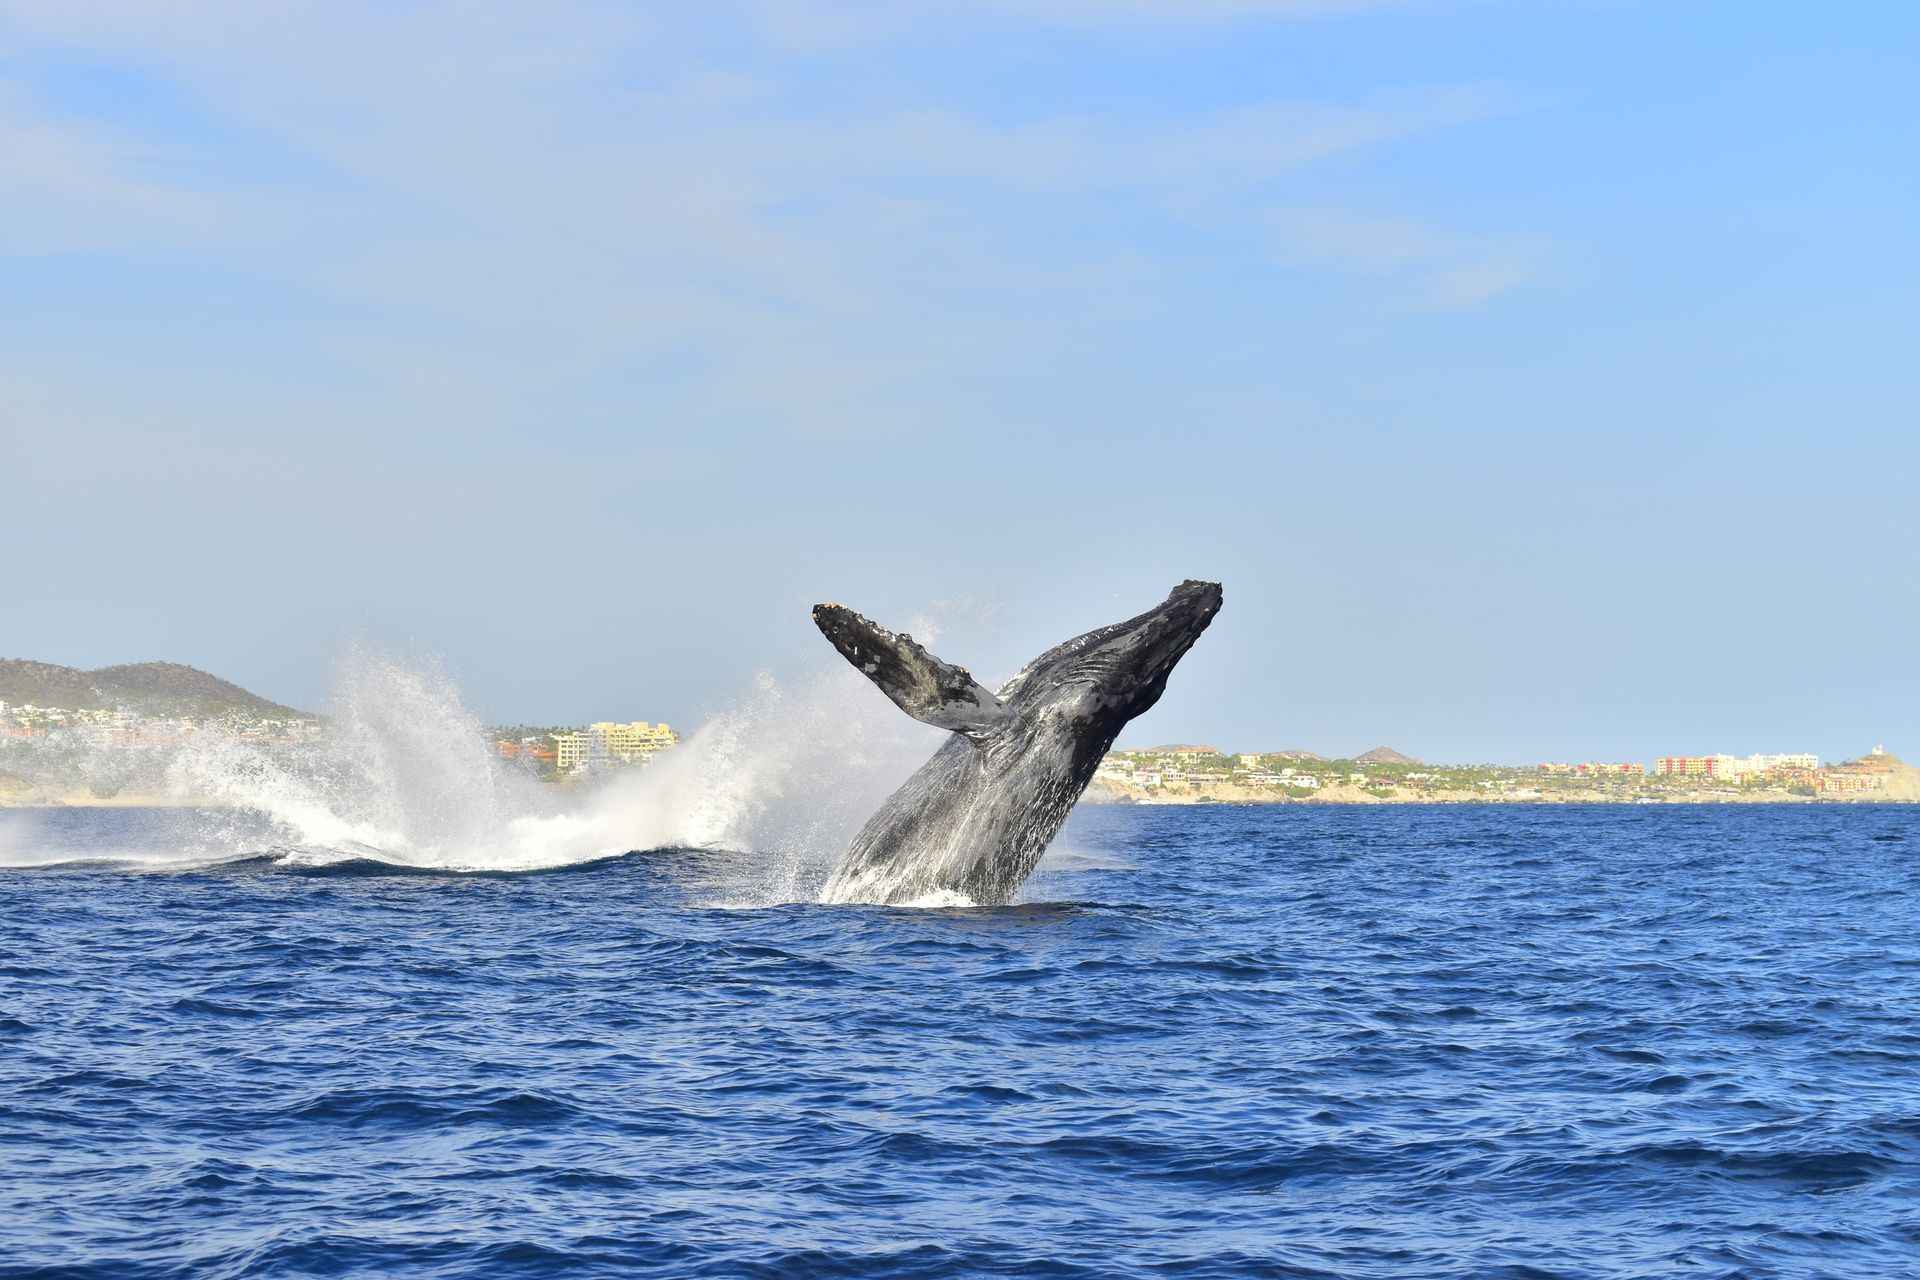 A humpback whale is jumping out of the ocean.